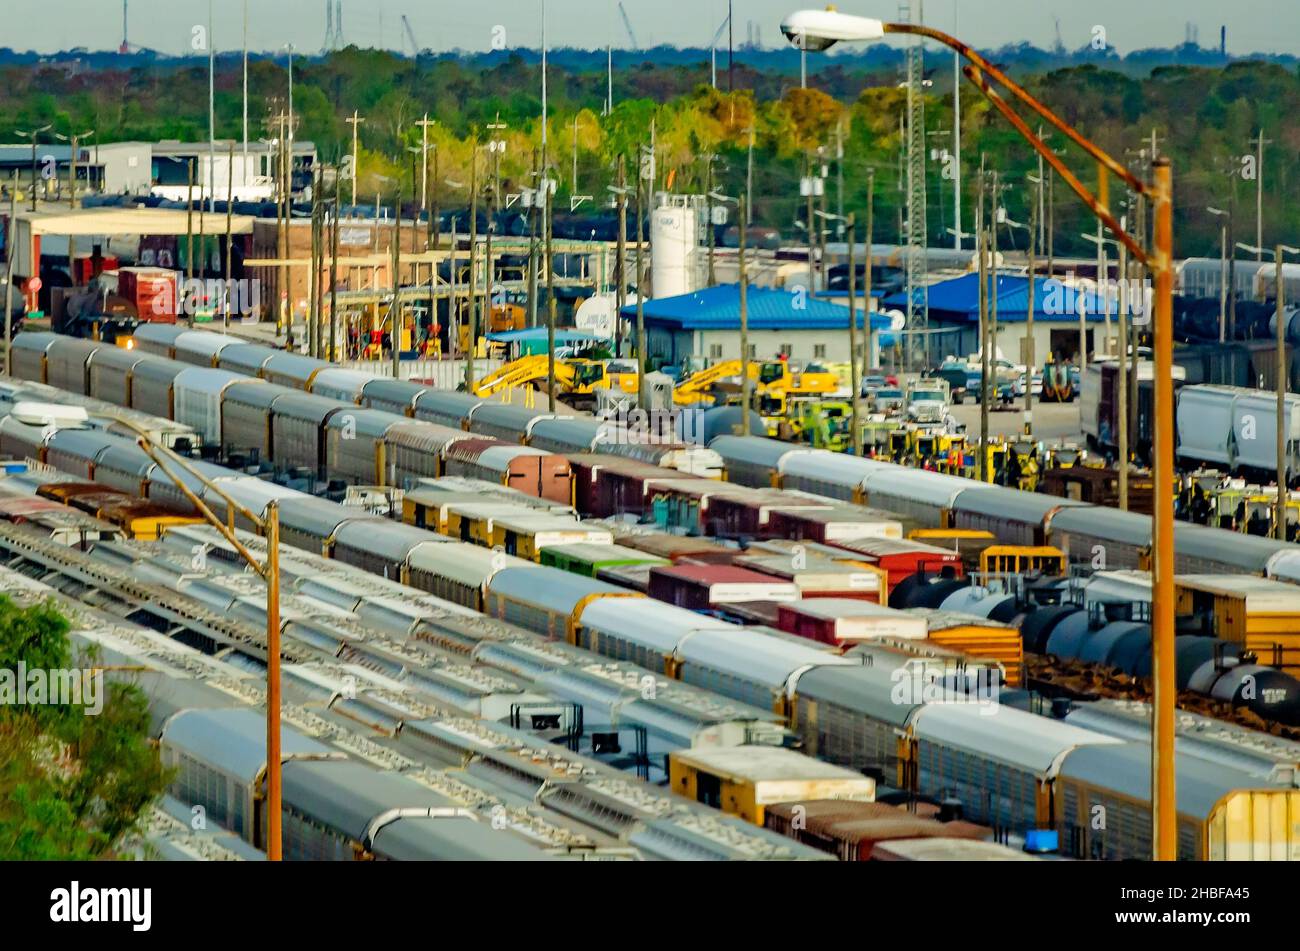 The CSX railyard is pictured, Dec. 13, 2021, in New Orleans, Louisiana. CSX operates and maintains nearly 140 miles of track in Louisiana. Stock Photo